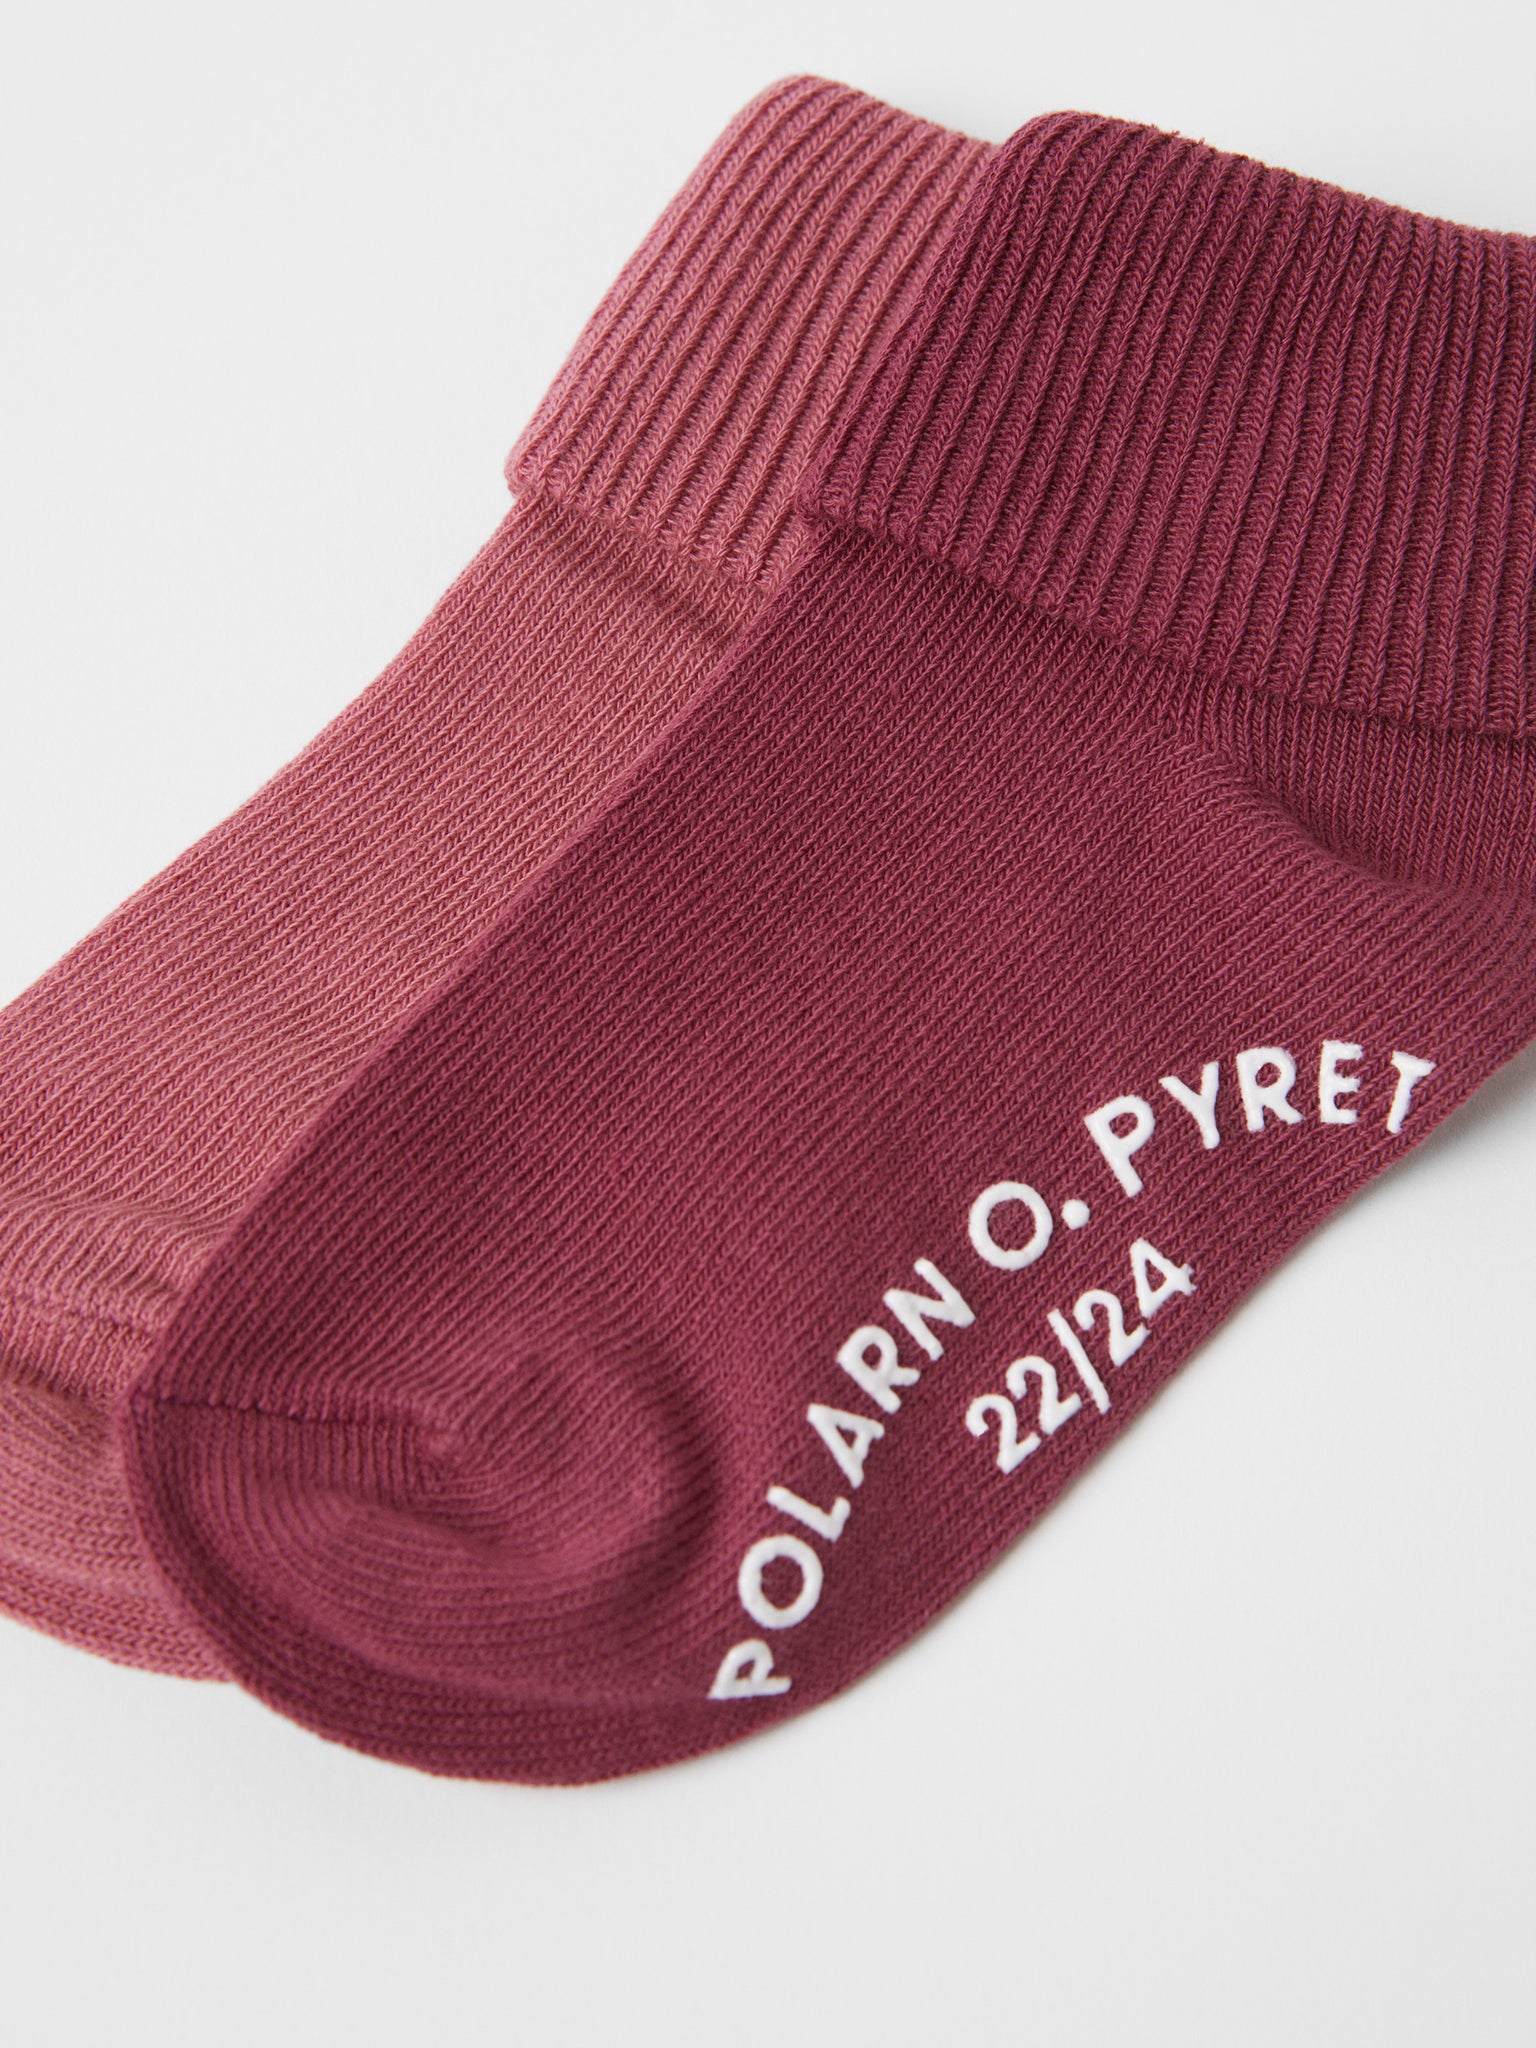 Pink Antislip Kids Socks Multipack from the Polarn O. Pyret kidswear collection. Clothes made using sustainably sourced materials.